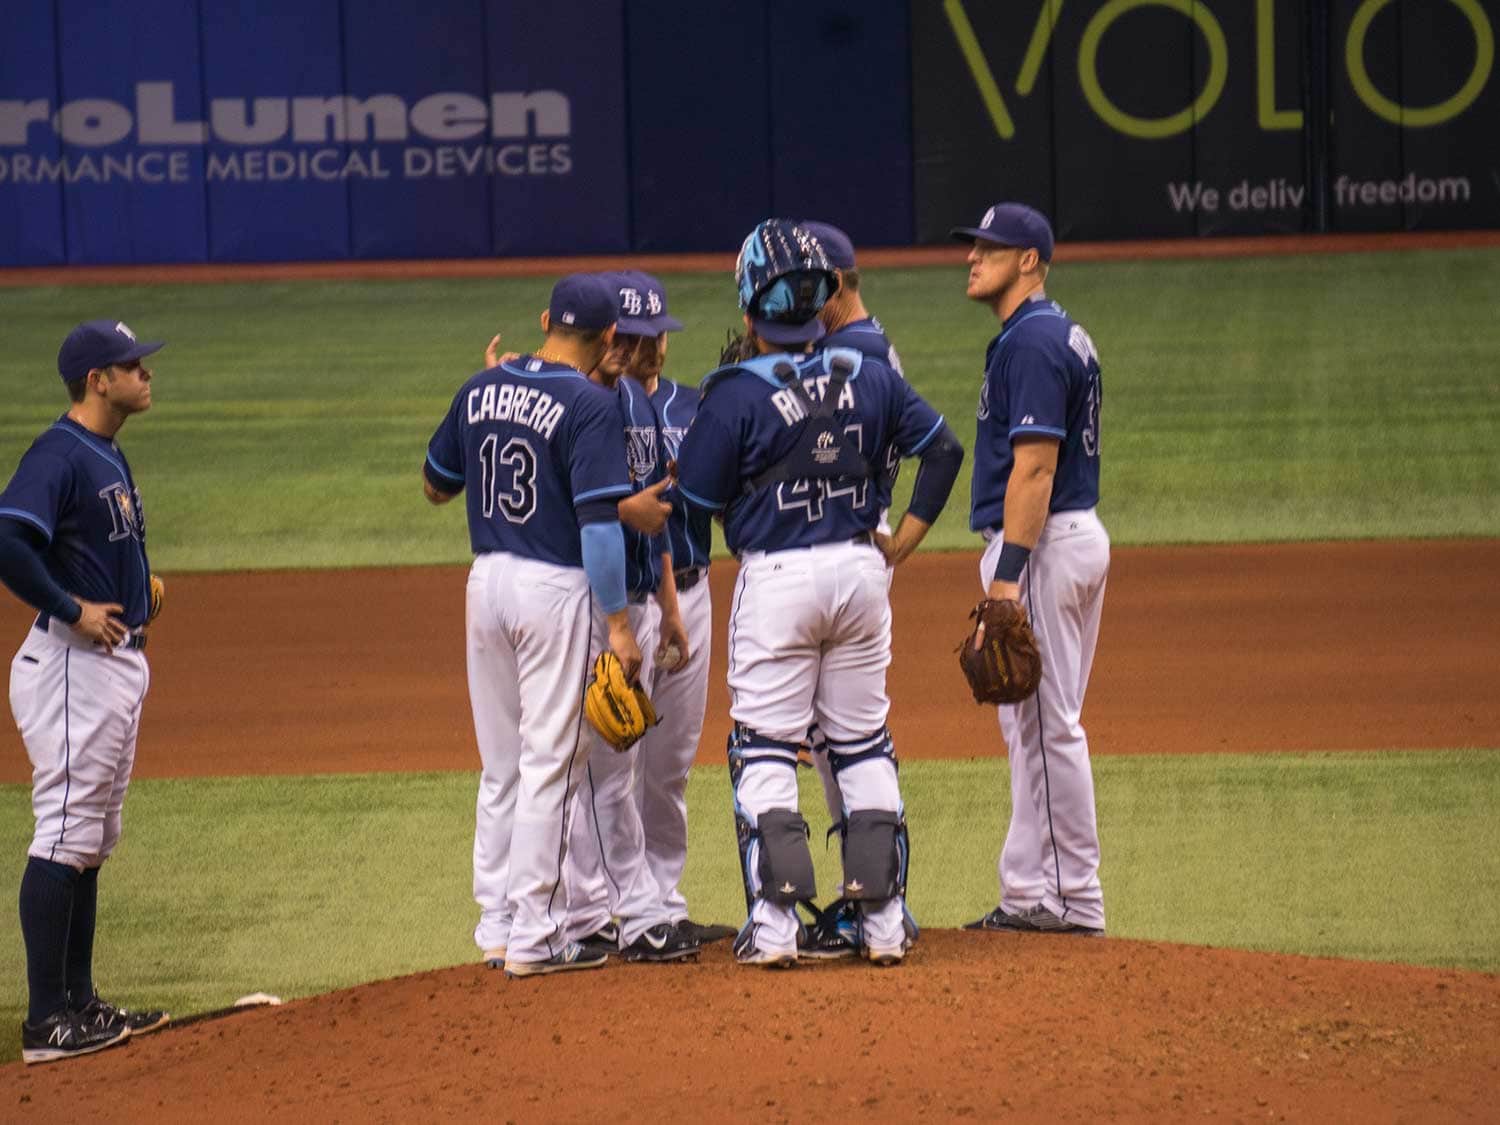 Rays players talking on the pitching mound.